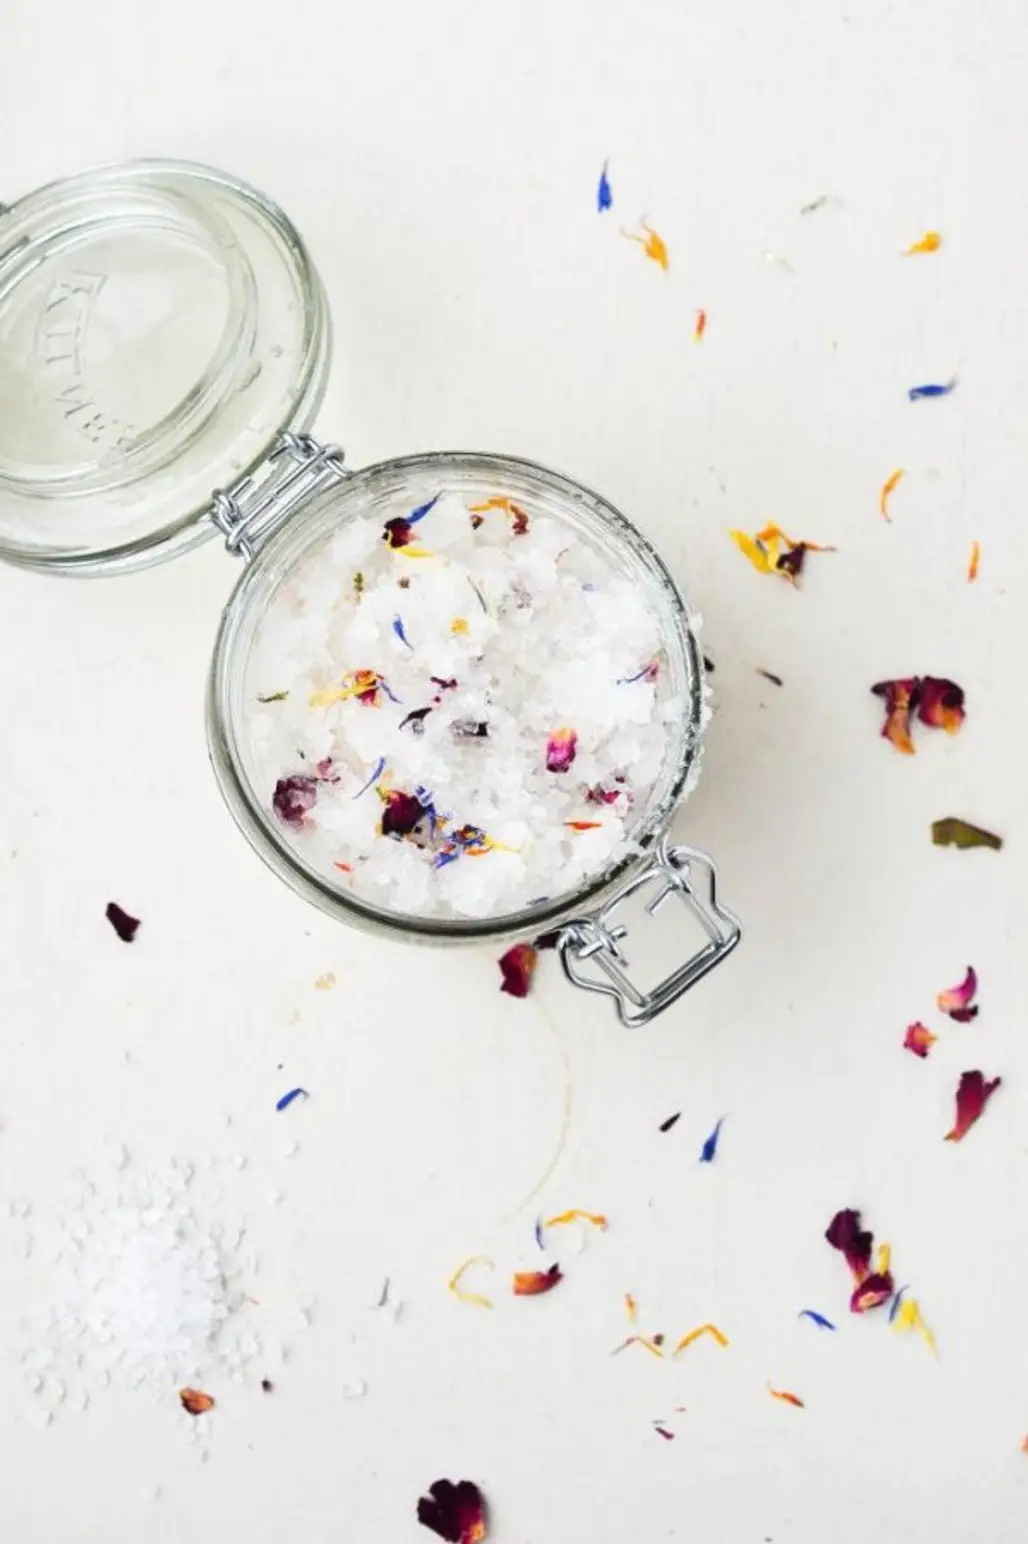 Make Your Own Body Scrub with Petals